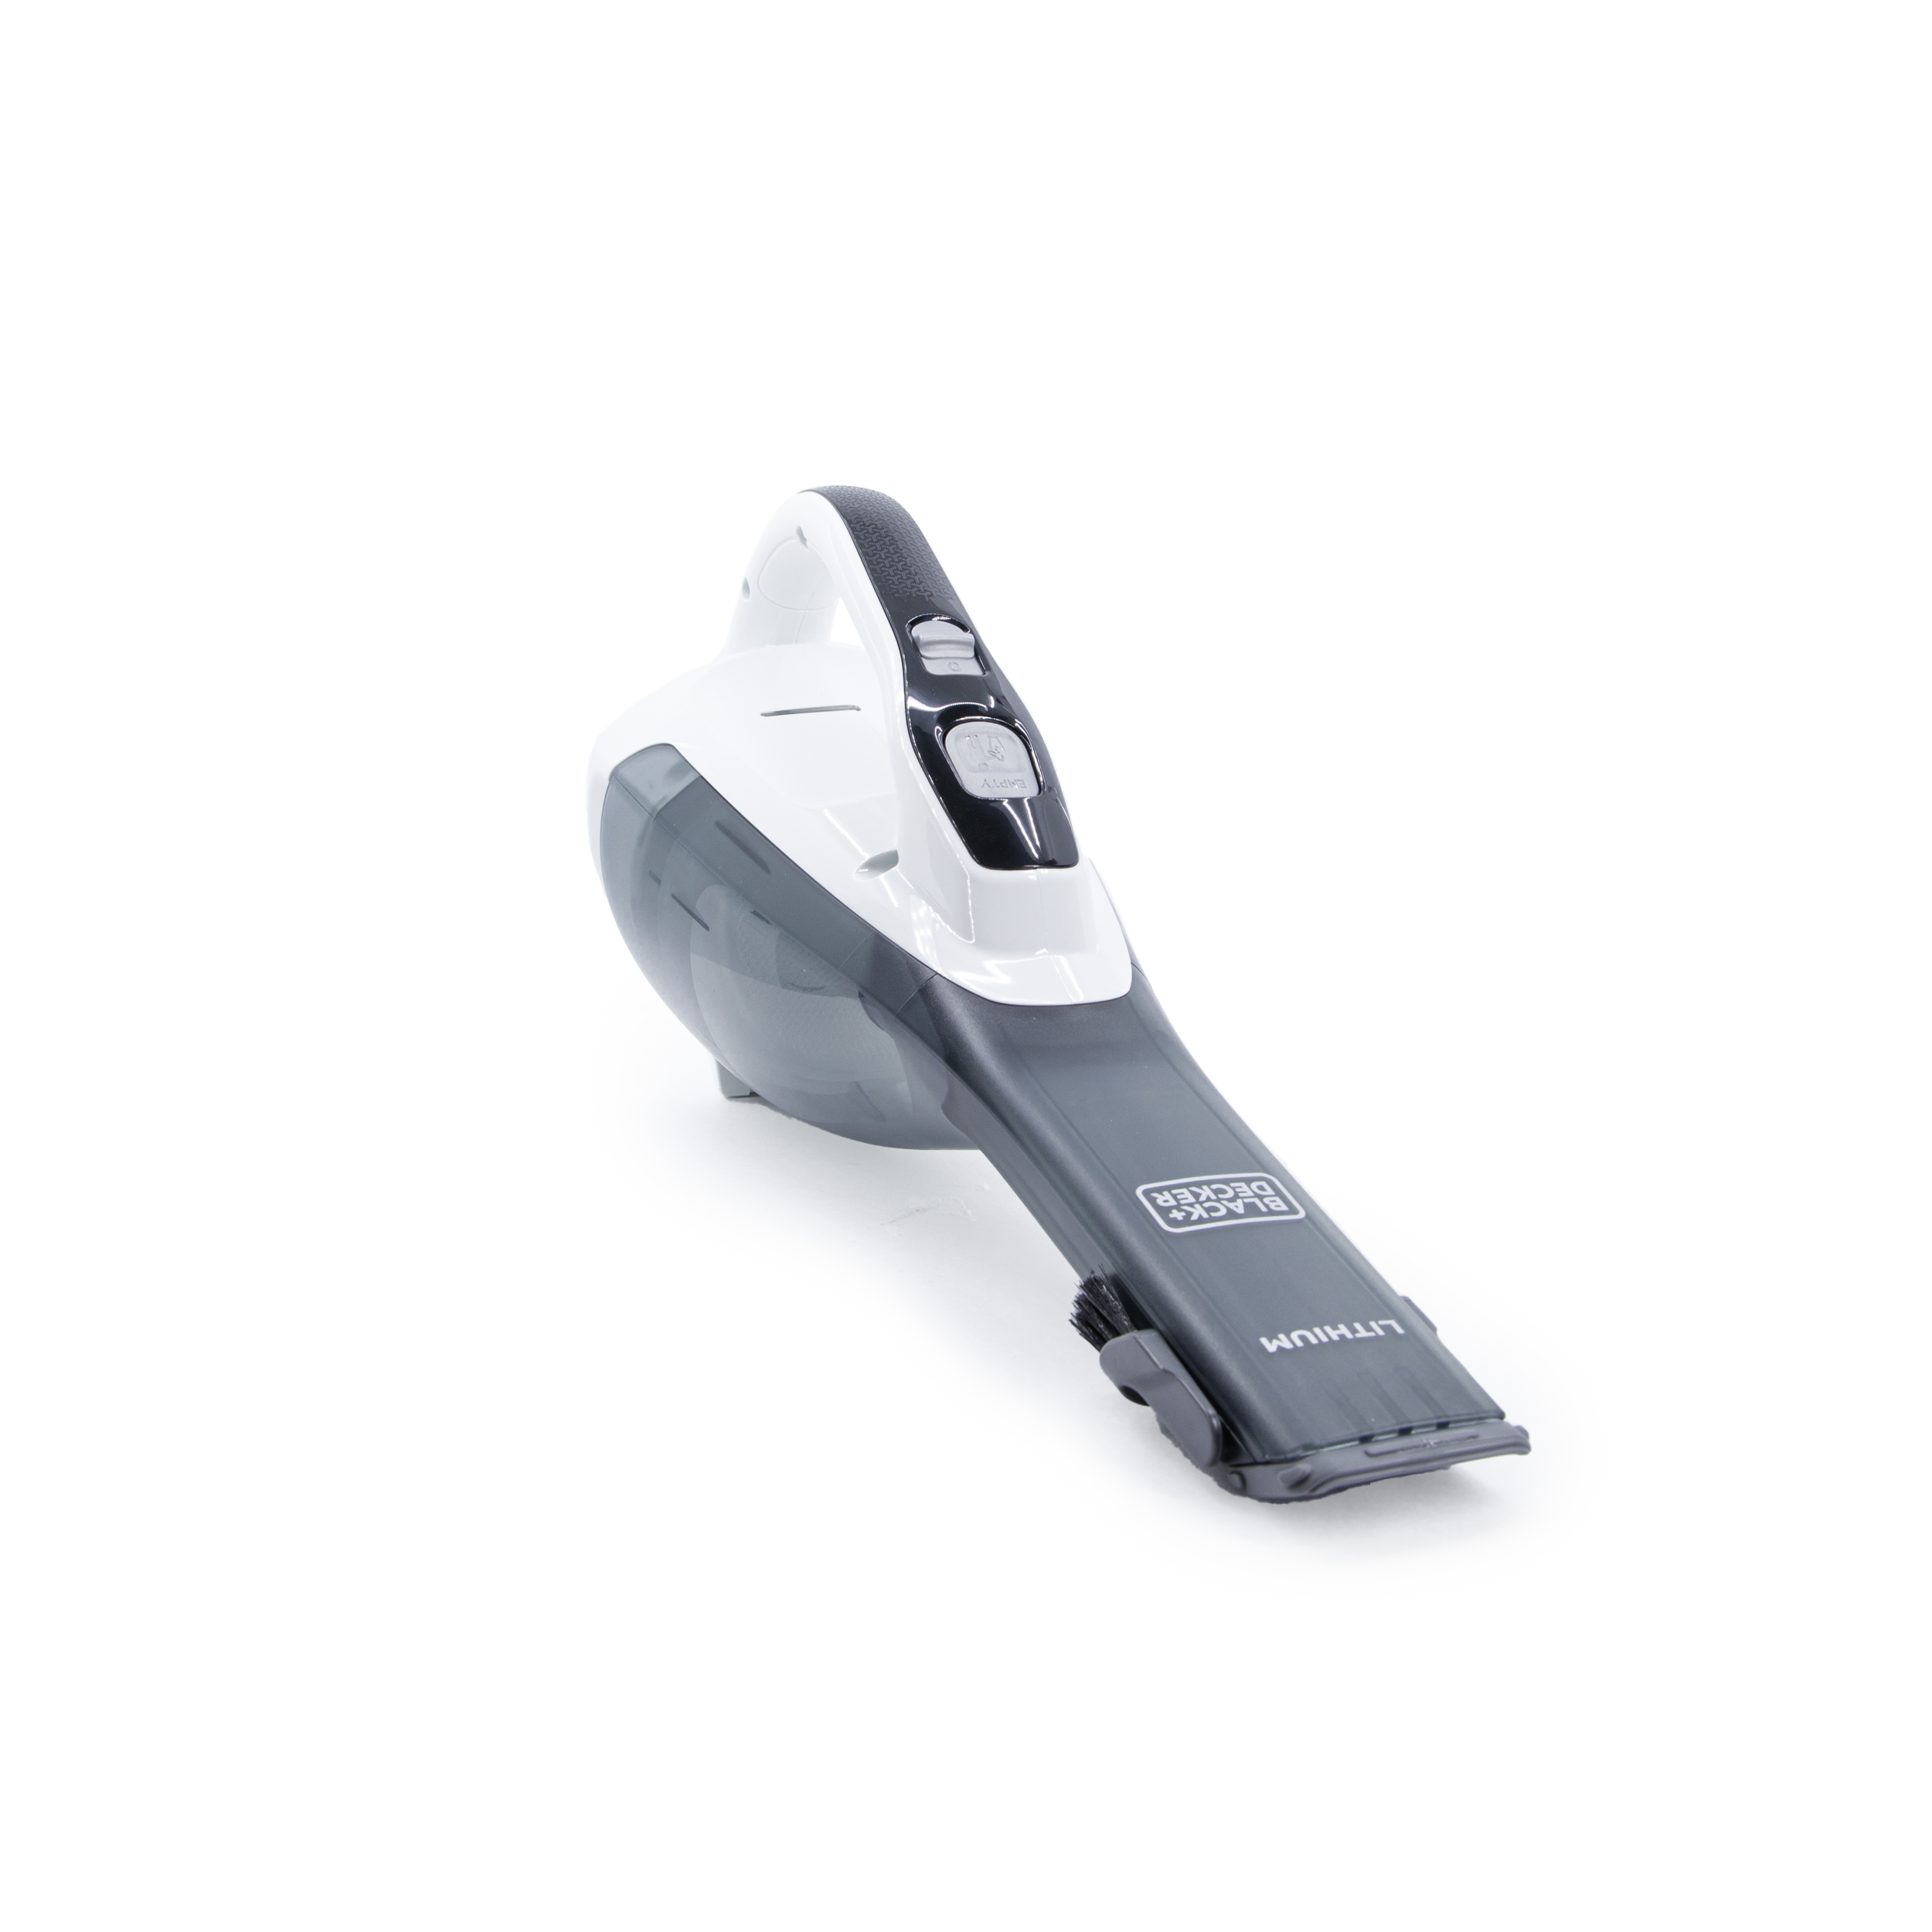 Questions and Answers: Black+Decker Cordless Hand Vac White/Black